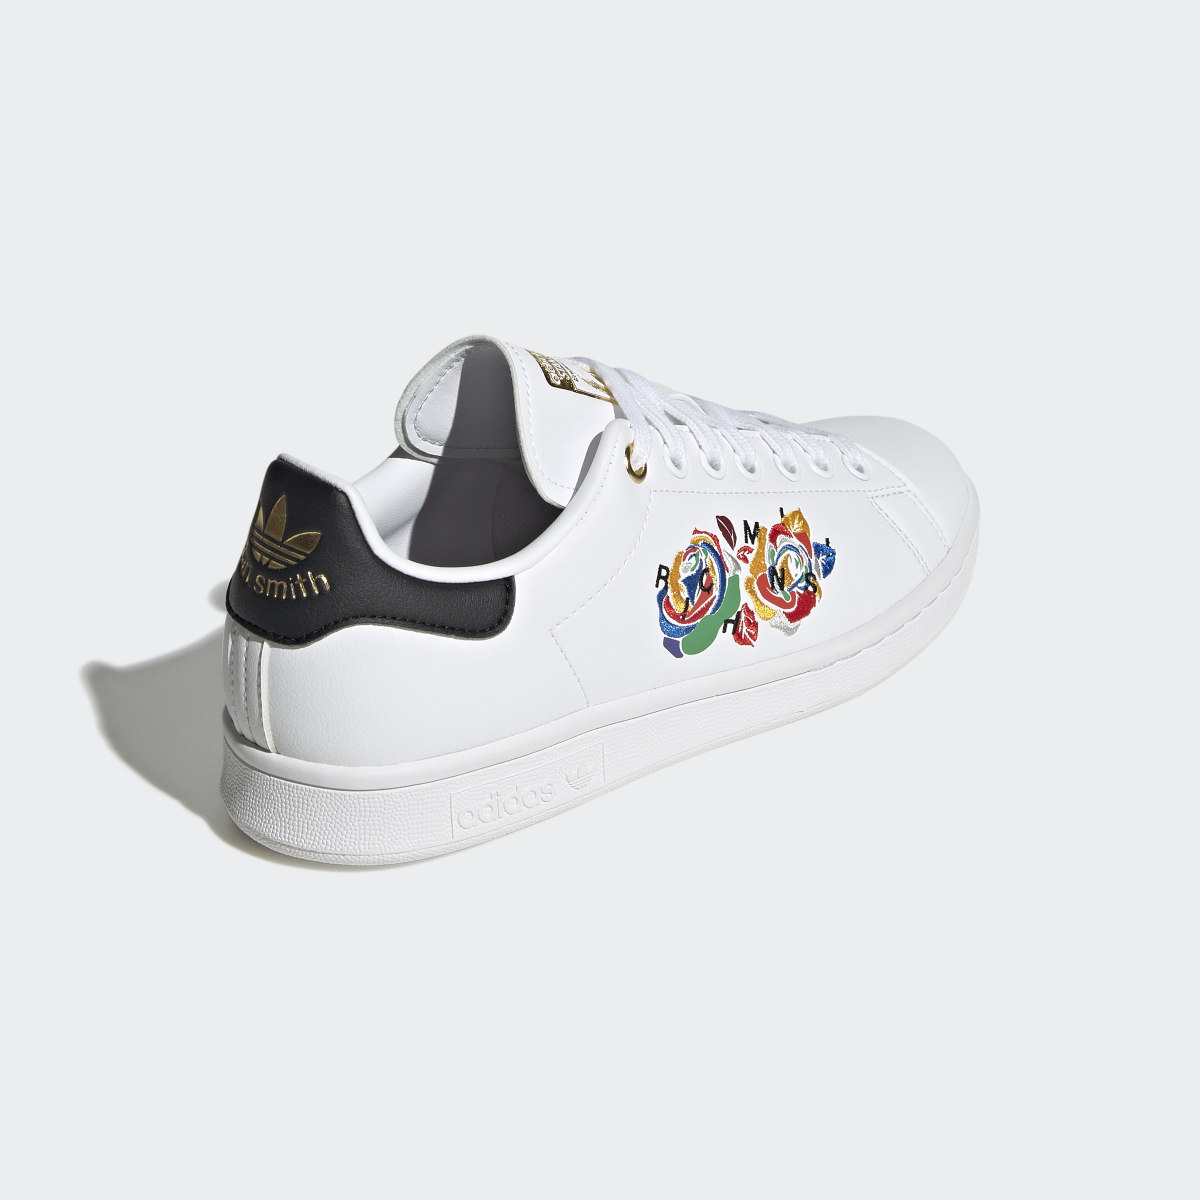 Adidas Rich Mnisi Stan Smith Shoes. 6